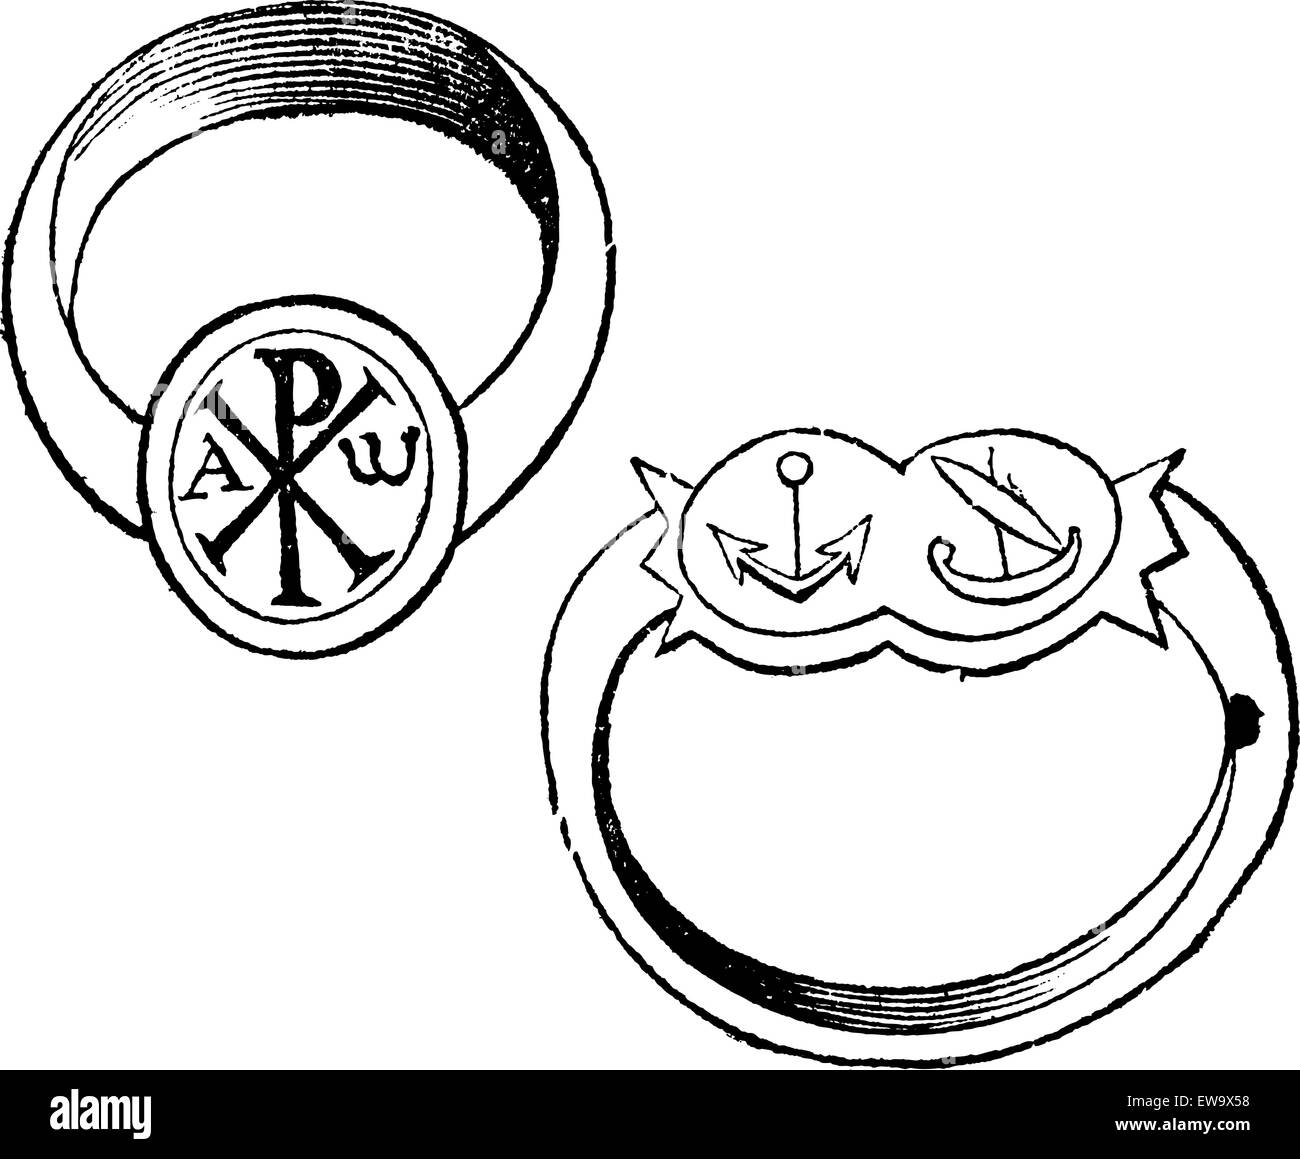 Two christian episcopal rings with symbols vintage engraving. Old engraved illustration of a bishp or archbishop ring, with the fish, dove and monogram of Christ, and the other with fin and branch. Stock Vector